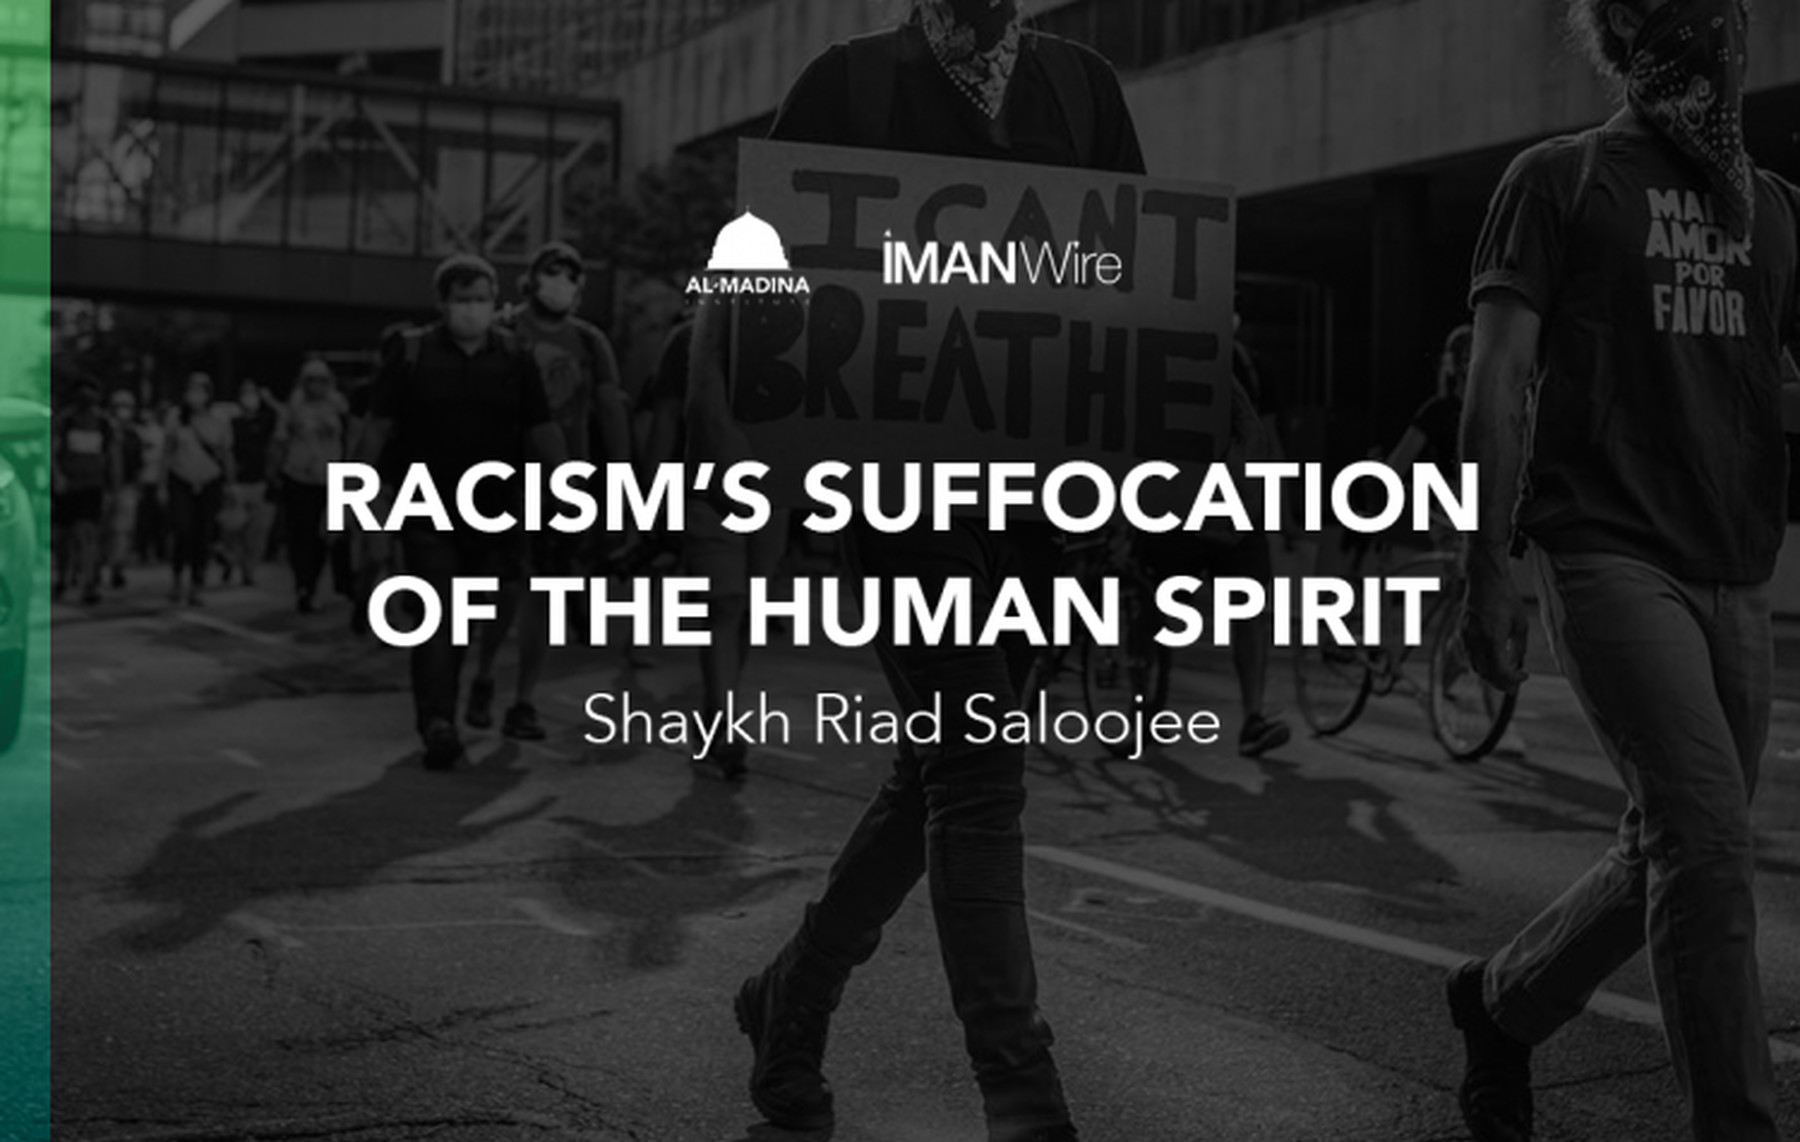 Web racism Ys suffocation of the human spirit 5 3 1200 x 700 750 476 c1